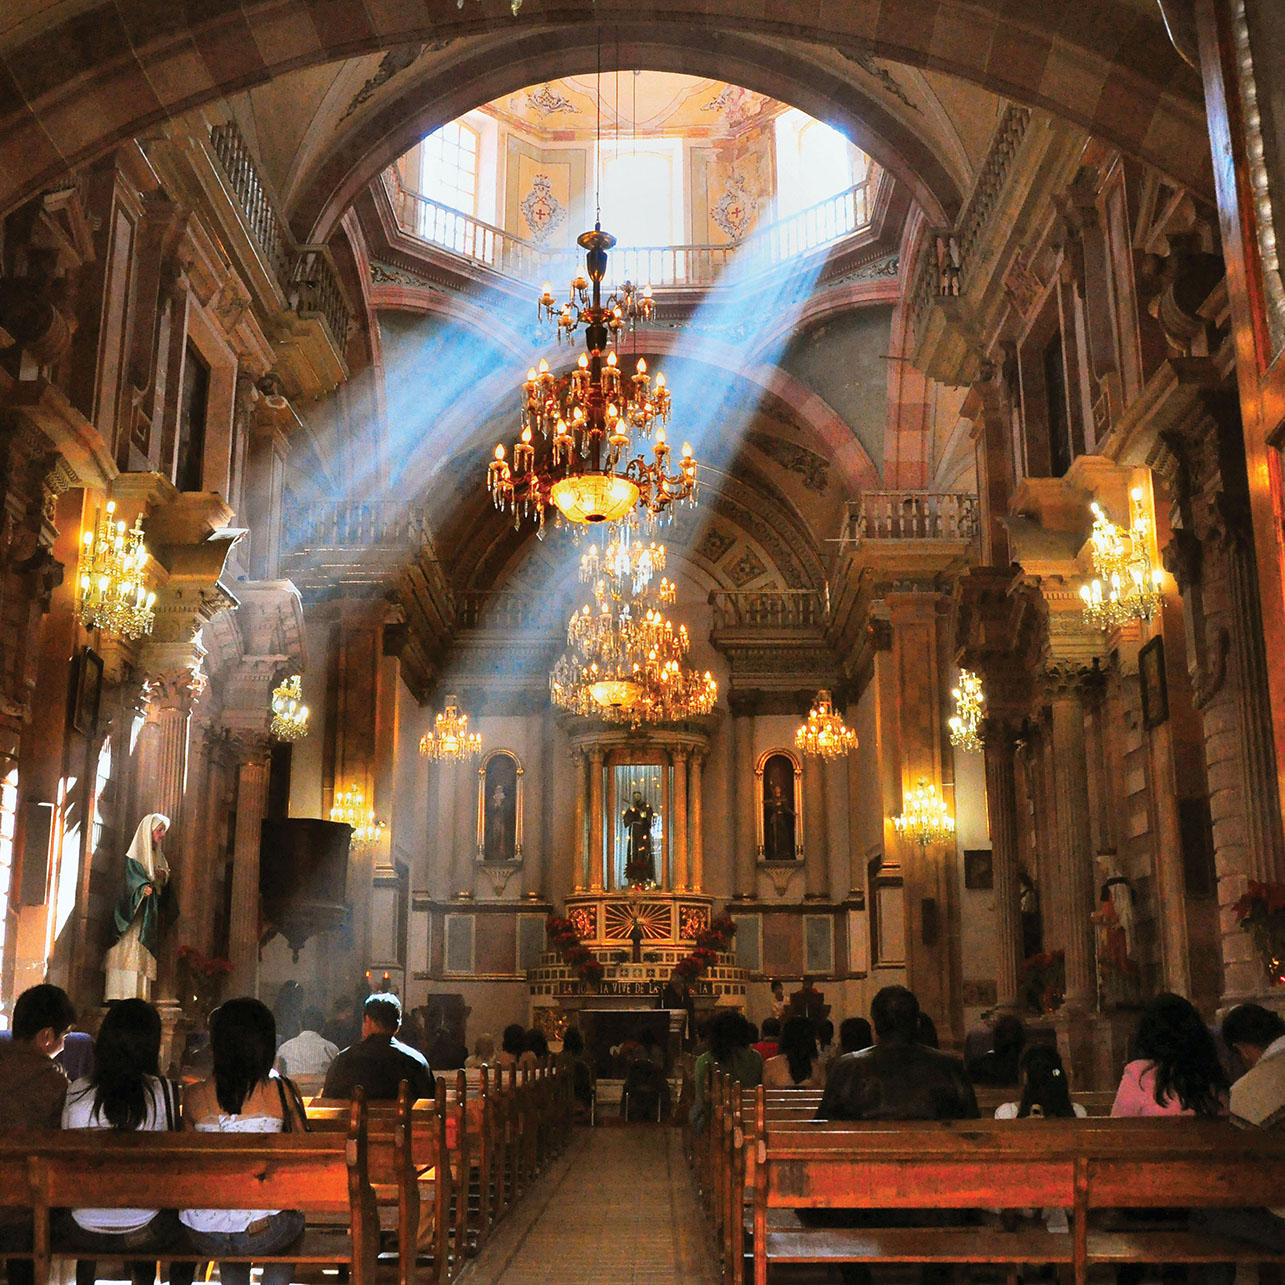 The interior of San Francisco Church, Guanajuato, Mexico, with sunbeams streaming through the windows. (Photo by Russ Bowling.)